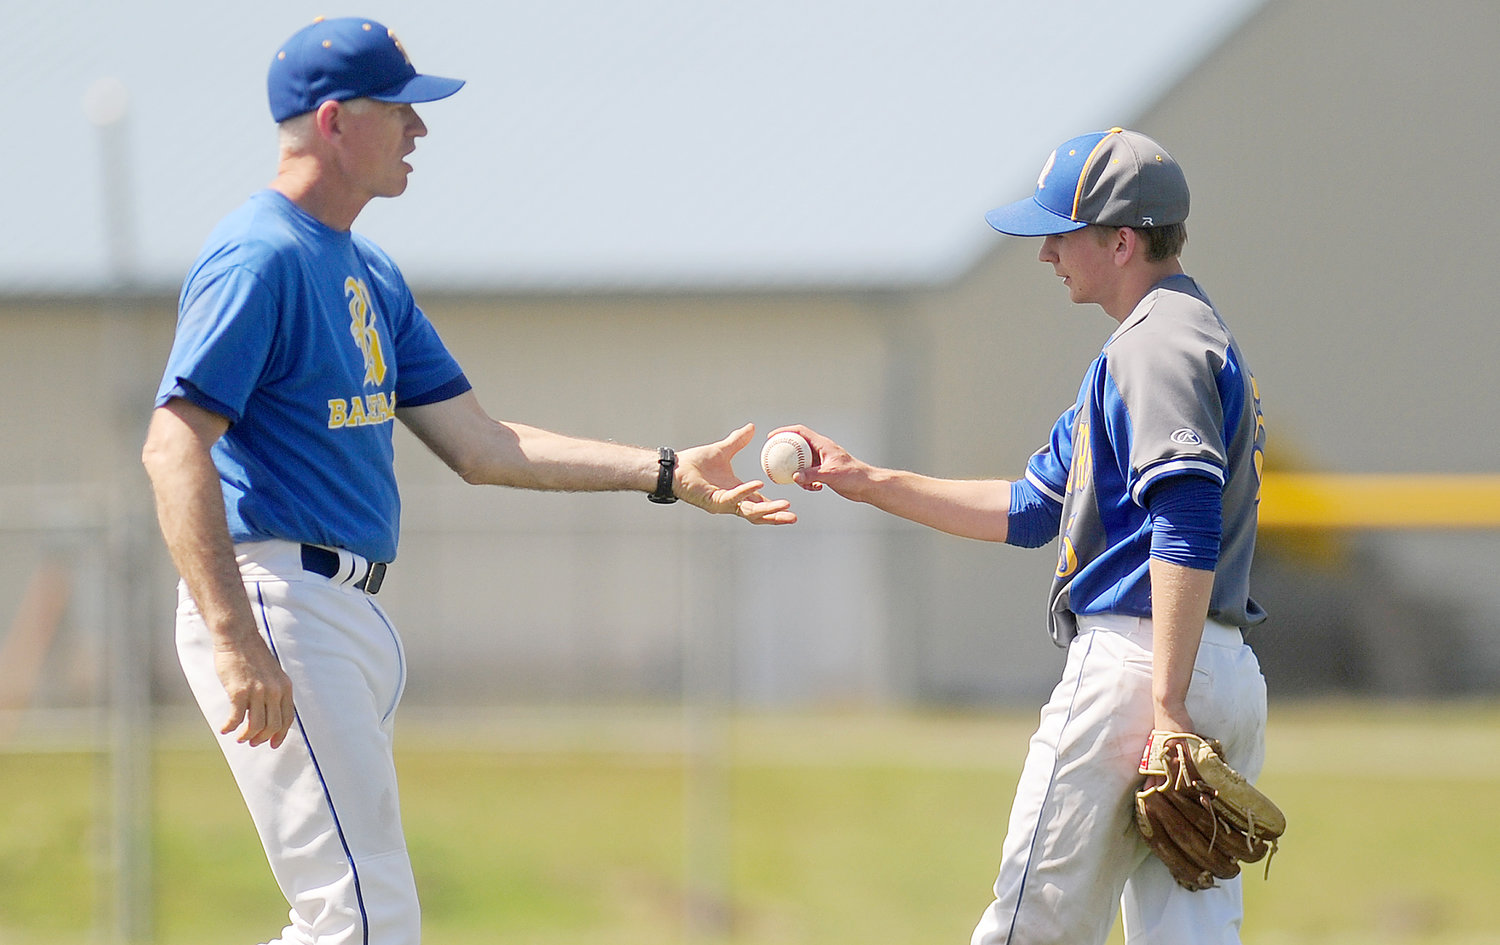 In this photo taken on Tuesday, May 13, Rochester High School head baseball coach Jerry Striegel removes starting pitcher Dylan Fosnacht from the mound after Fosnacht pitched a shutout into the 15th inning of a District IV 1A Baseball Tournament first-round game against La Center on Tuesday in Rochester, Wash. “There is kind of an uncomfortable feeling when you send a kid out for the 13-14-15th (innings),” Rochester coach Jerry Striegel said. “His velocity looked like it hadn’t changed very much, and he said he felt good.”